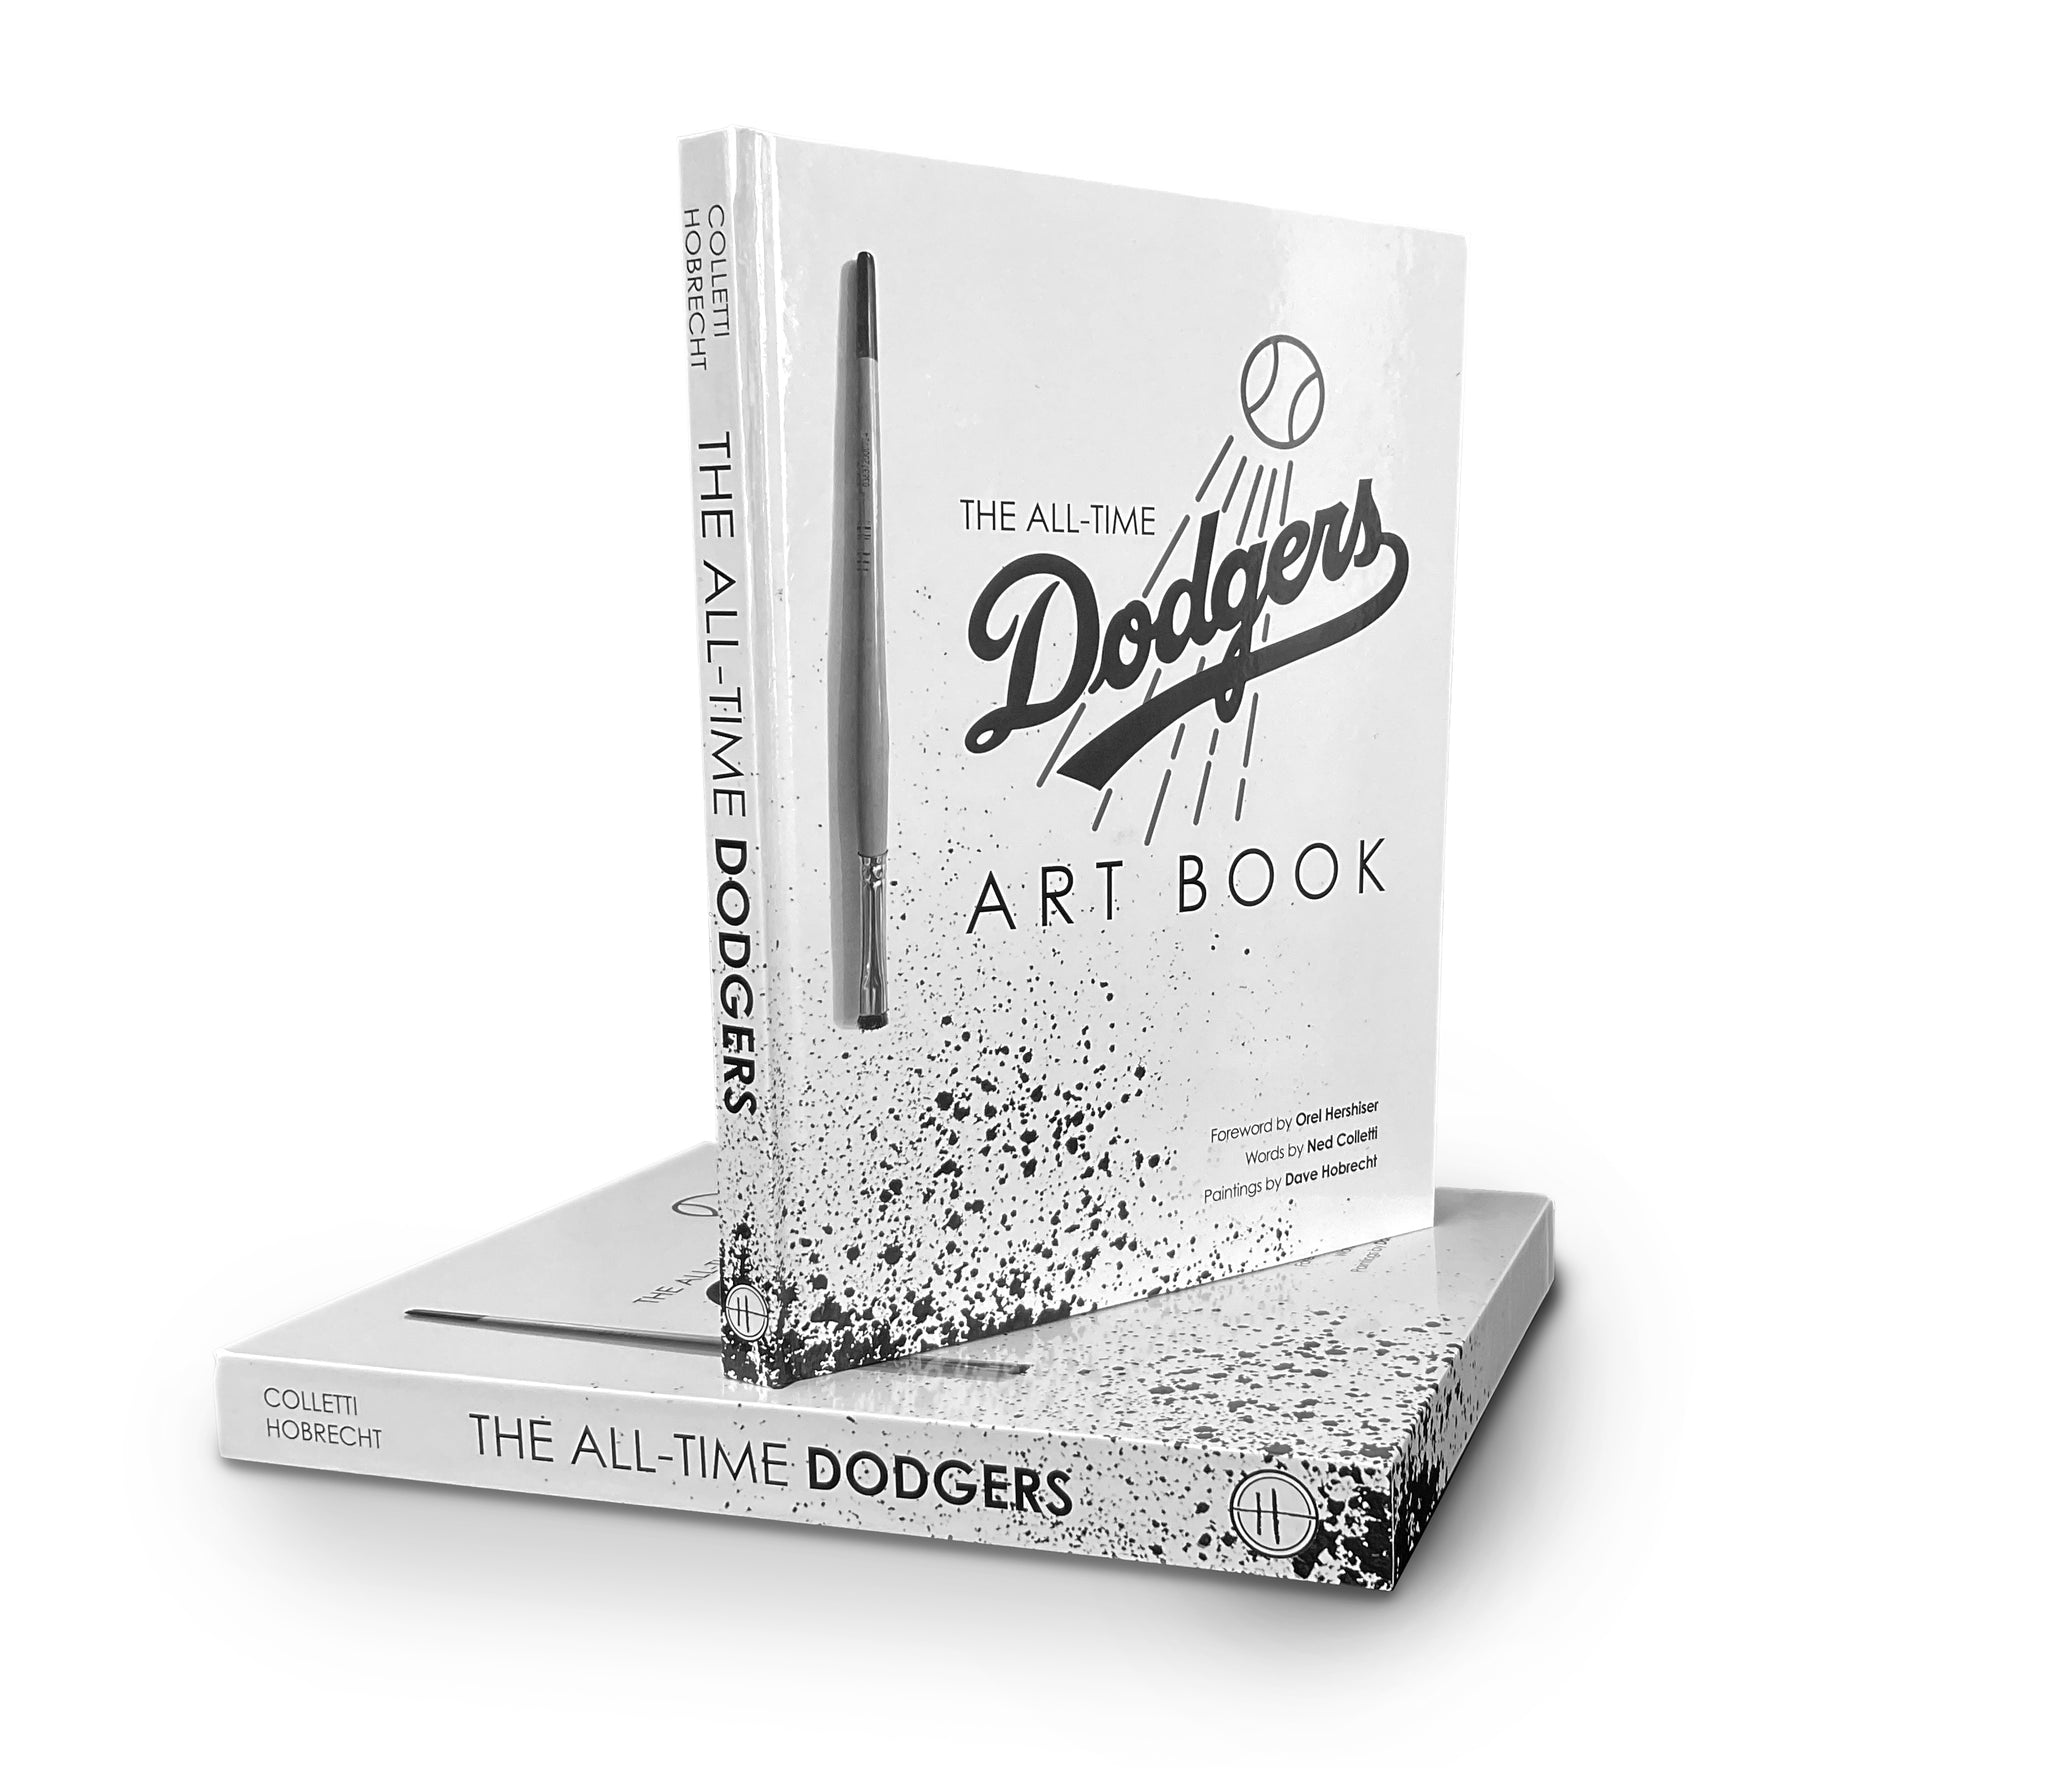 The All-Time Dodgers Book (Limited Edition) - The All-Time